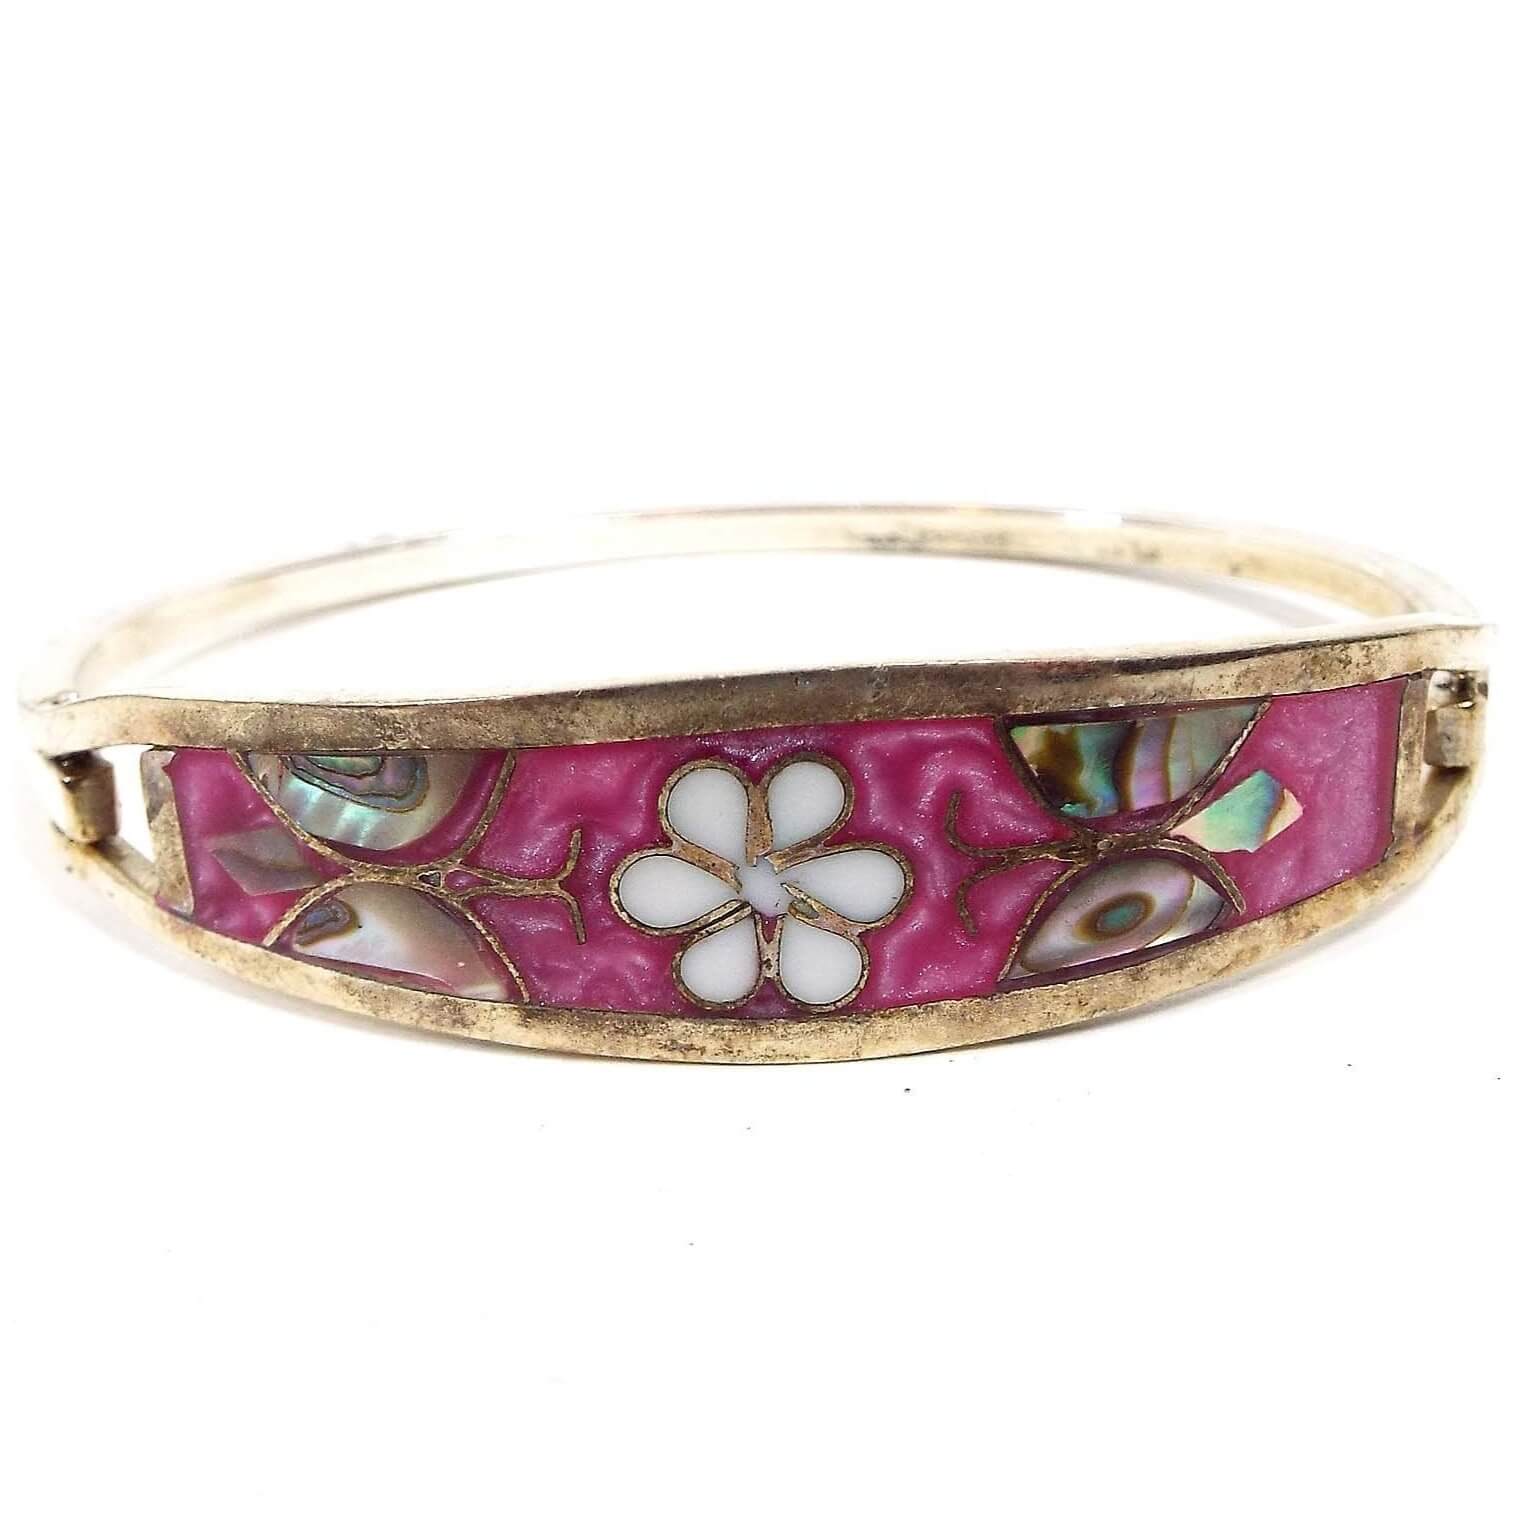 Front view of the retro vintage bangle bracelet with inlaid abalone. The front has a light pearly pink enamel with a white flower in the middle. On each side is a butterfly made of inlaid abalone shell. 